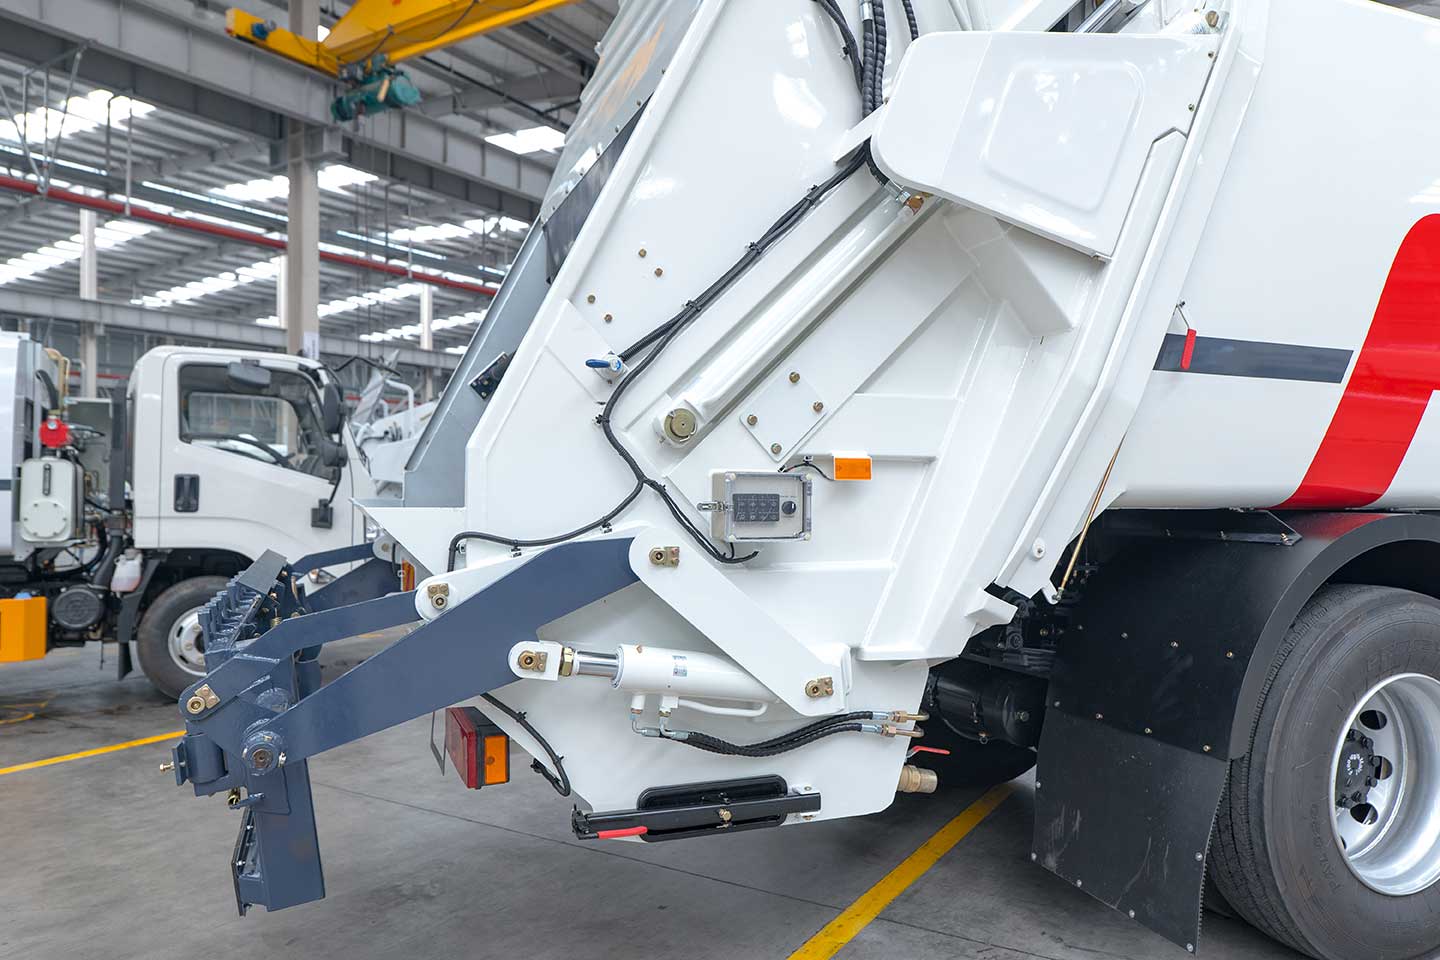 How Rear Loader Garbage Trucks Support Recycling Efforts?